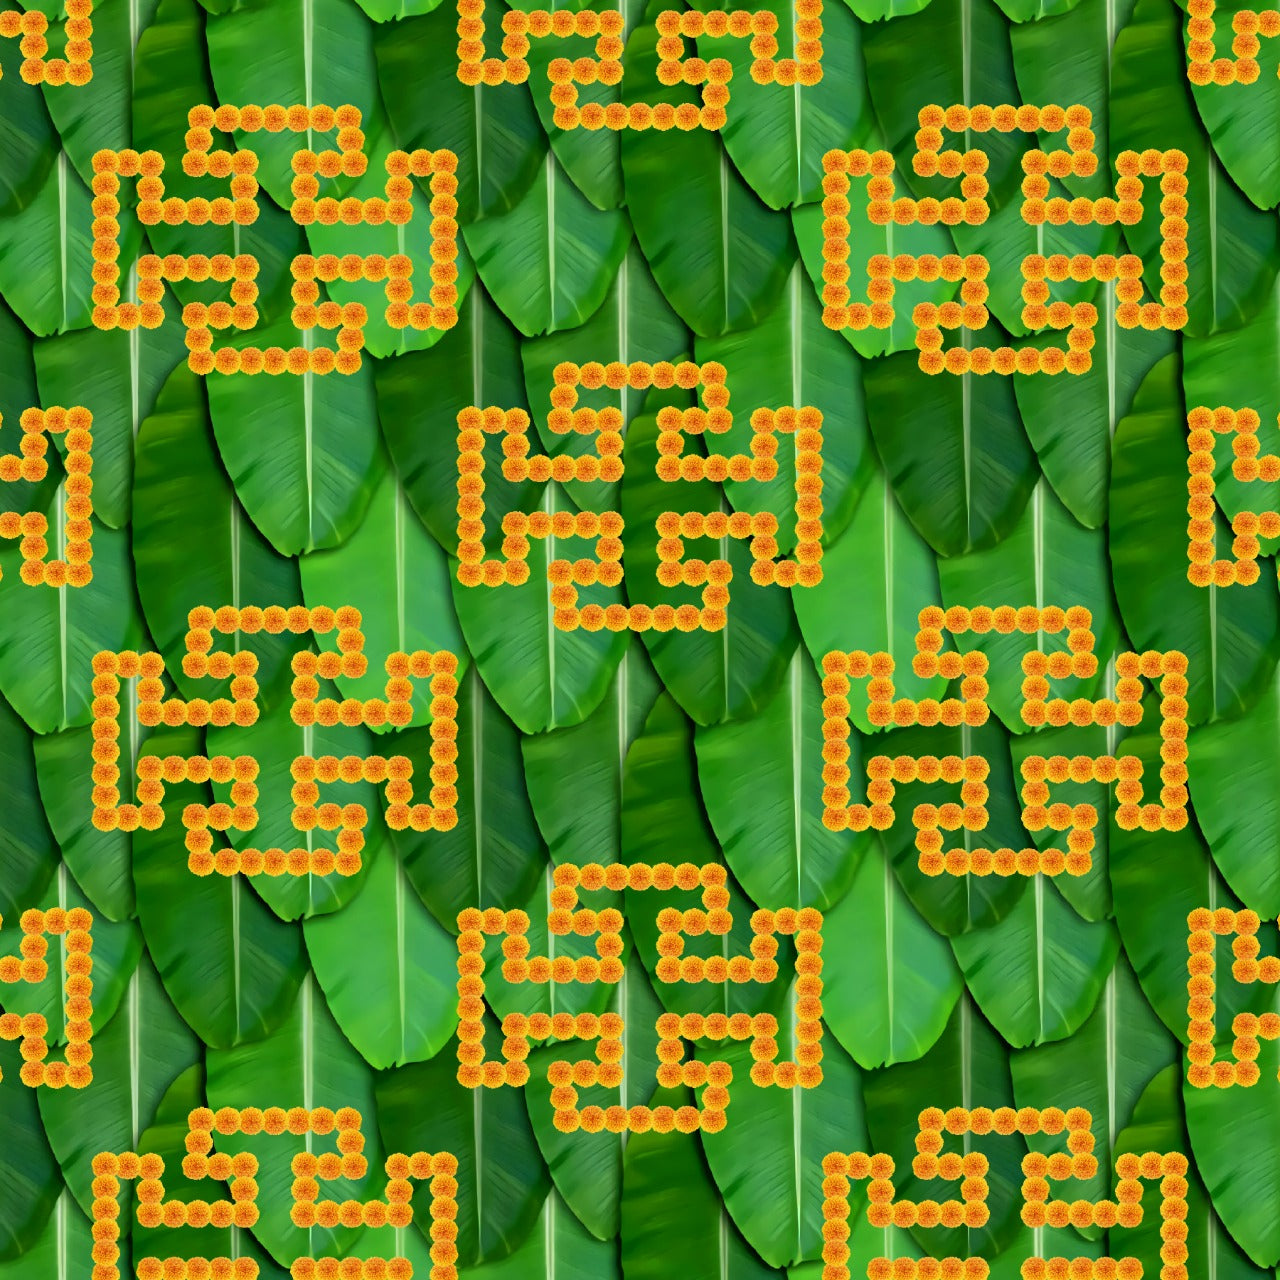 South Indian Backdrop: Texture of Banana leaf with angular pattern of Flowers